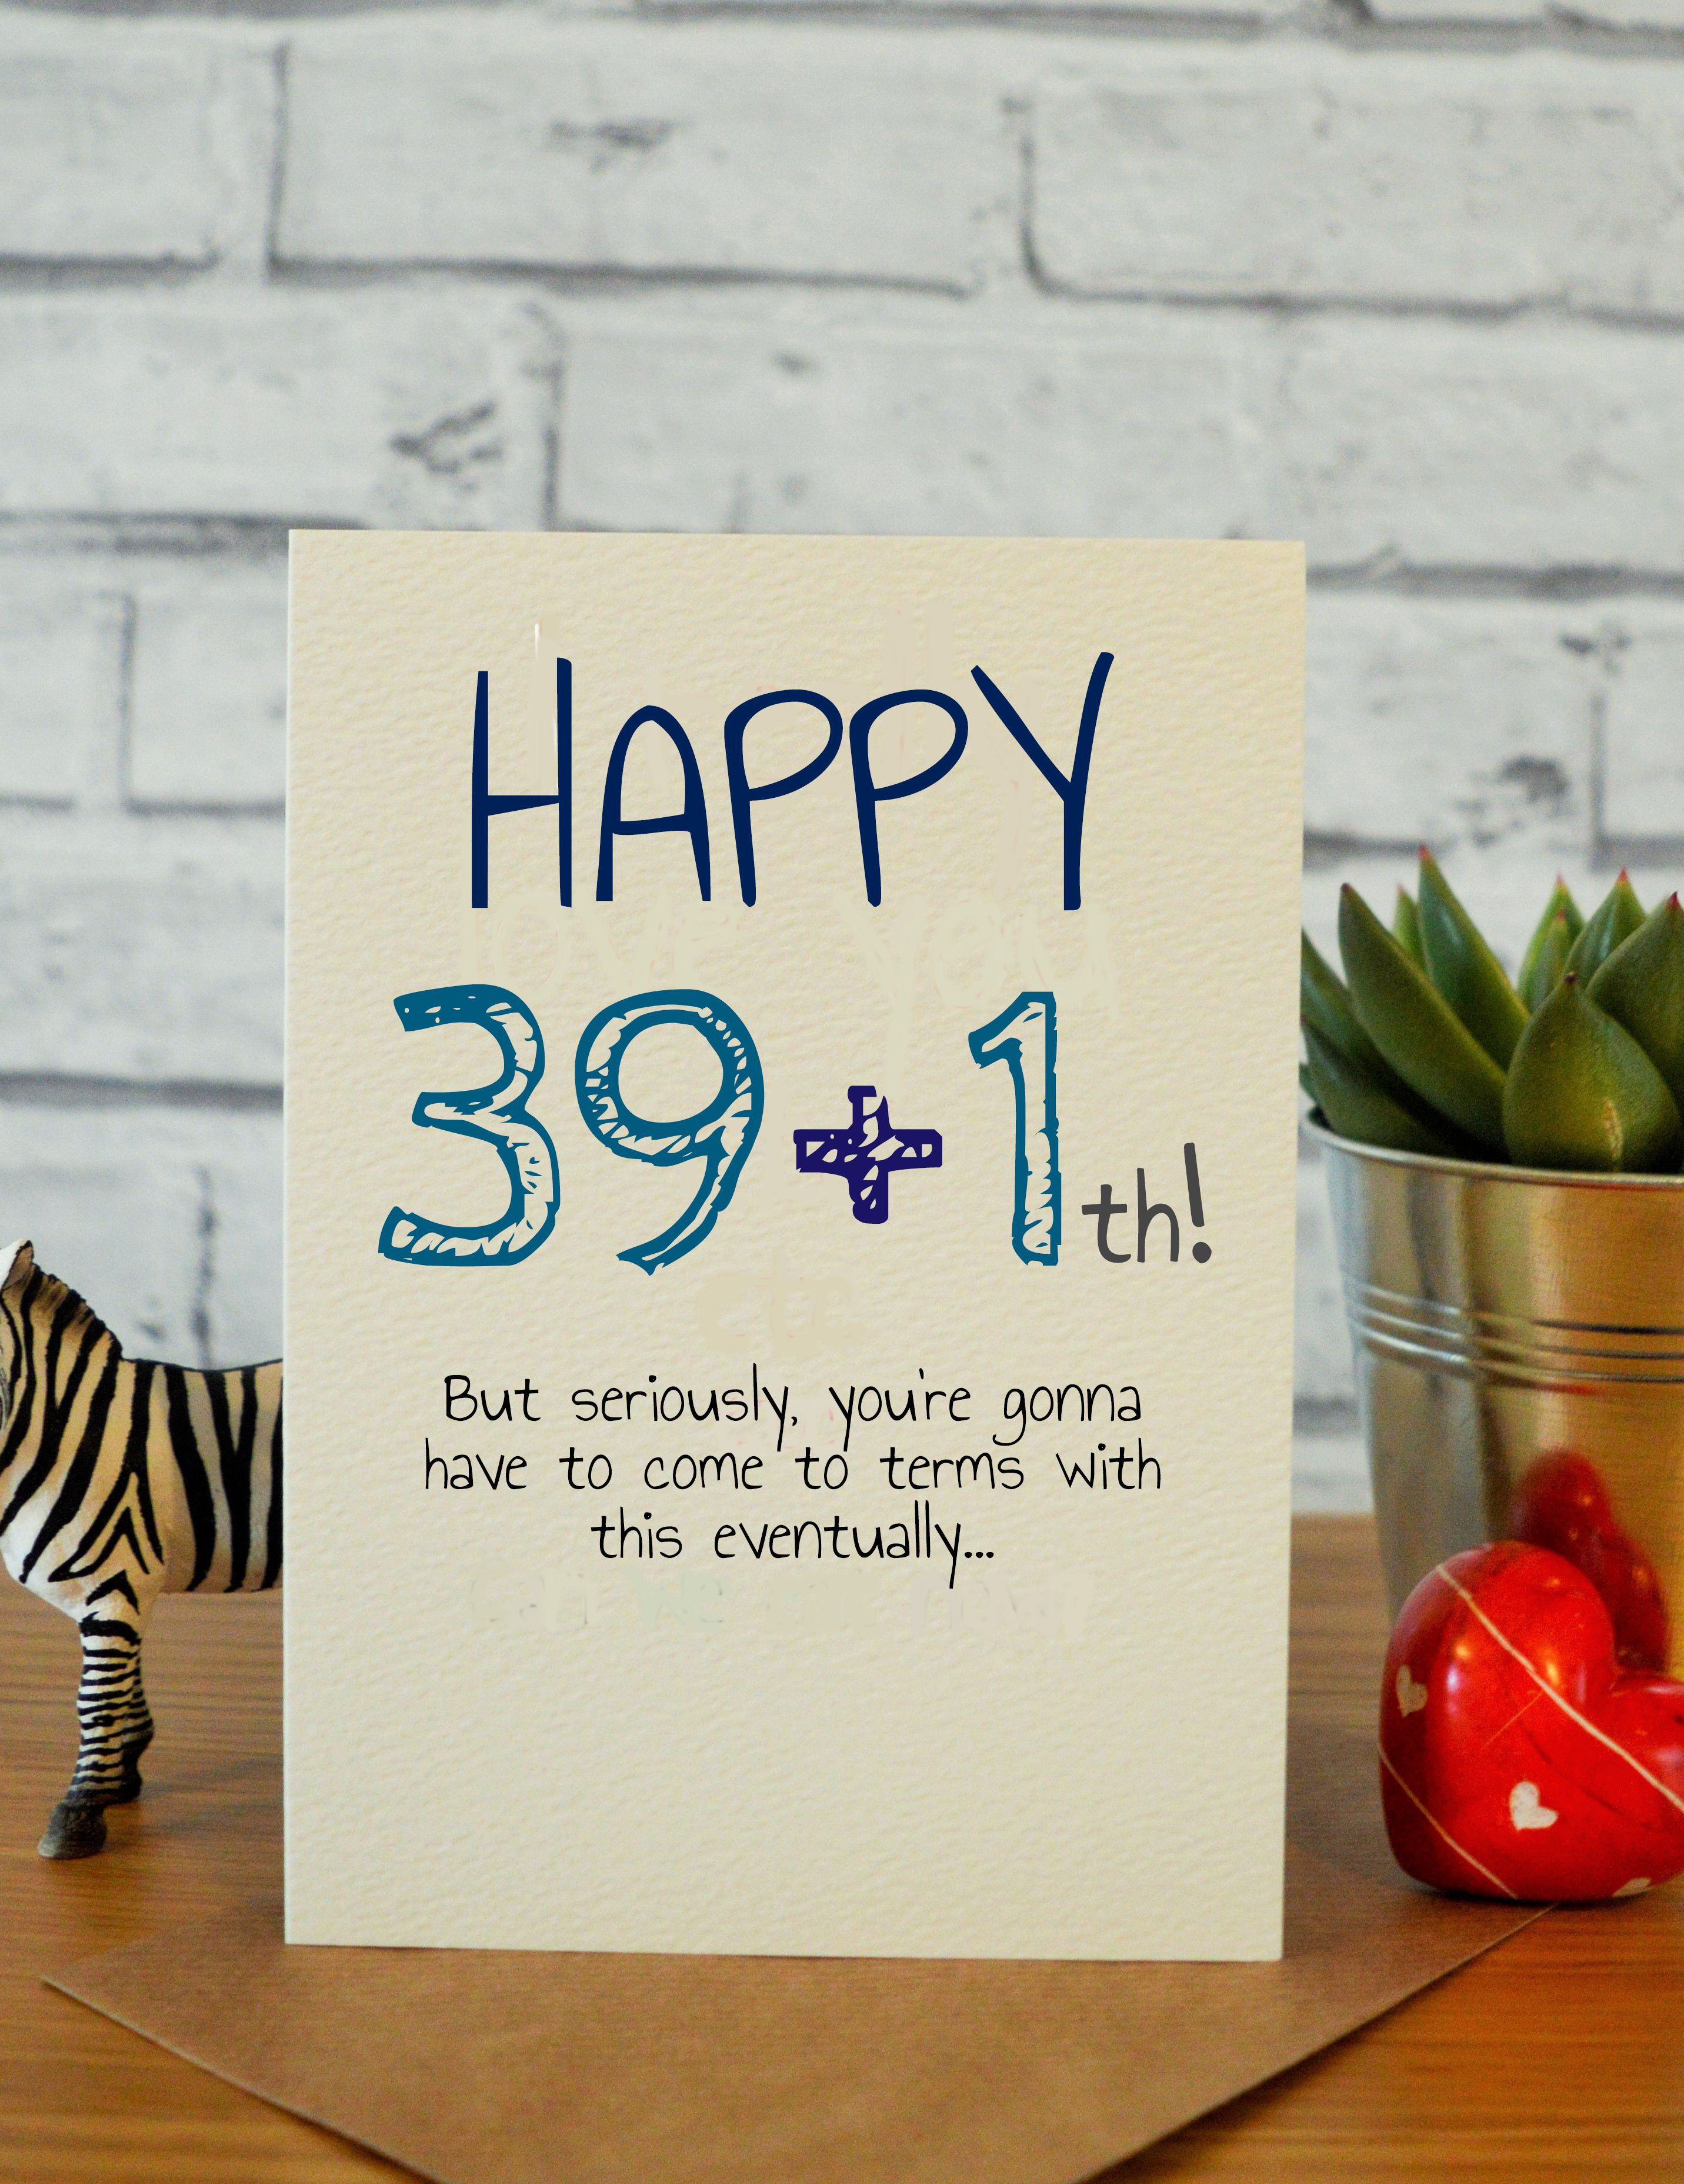 Funny Ideas For Birthday Cards Cards Funny Homemade Birthday Cards Scenic 39 1th Gift Ideas